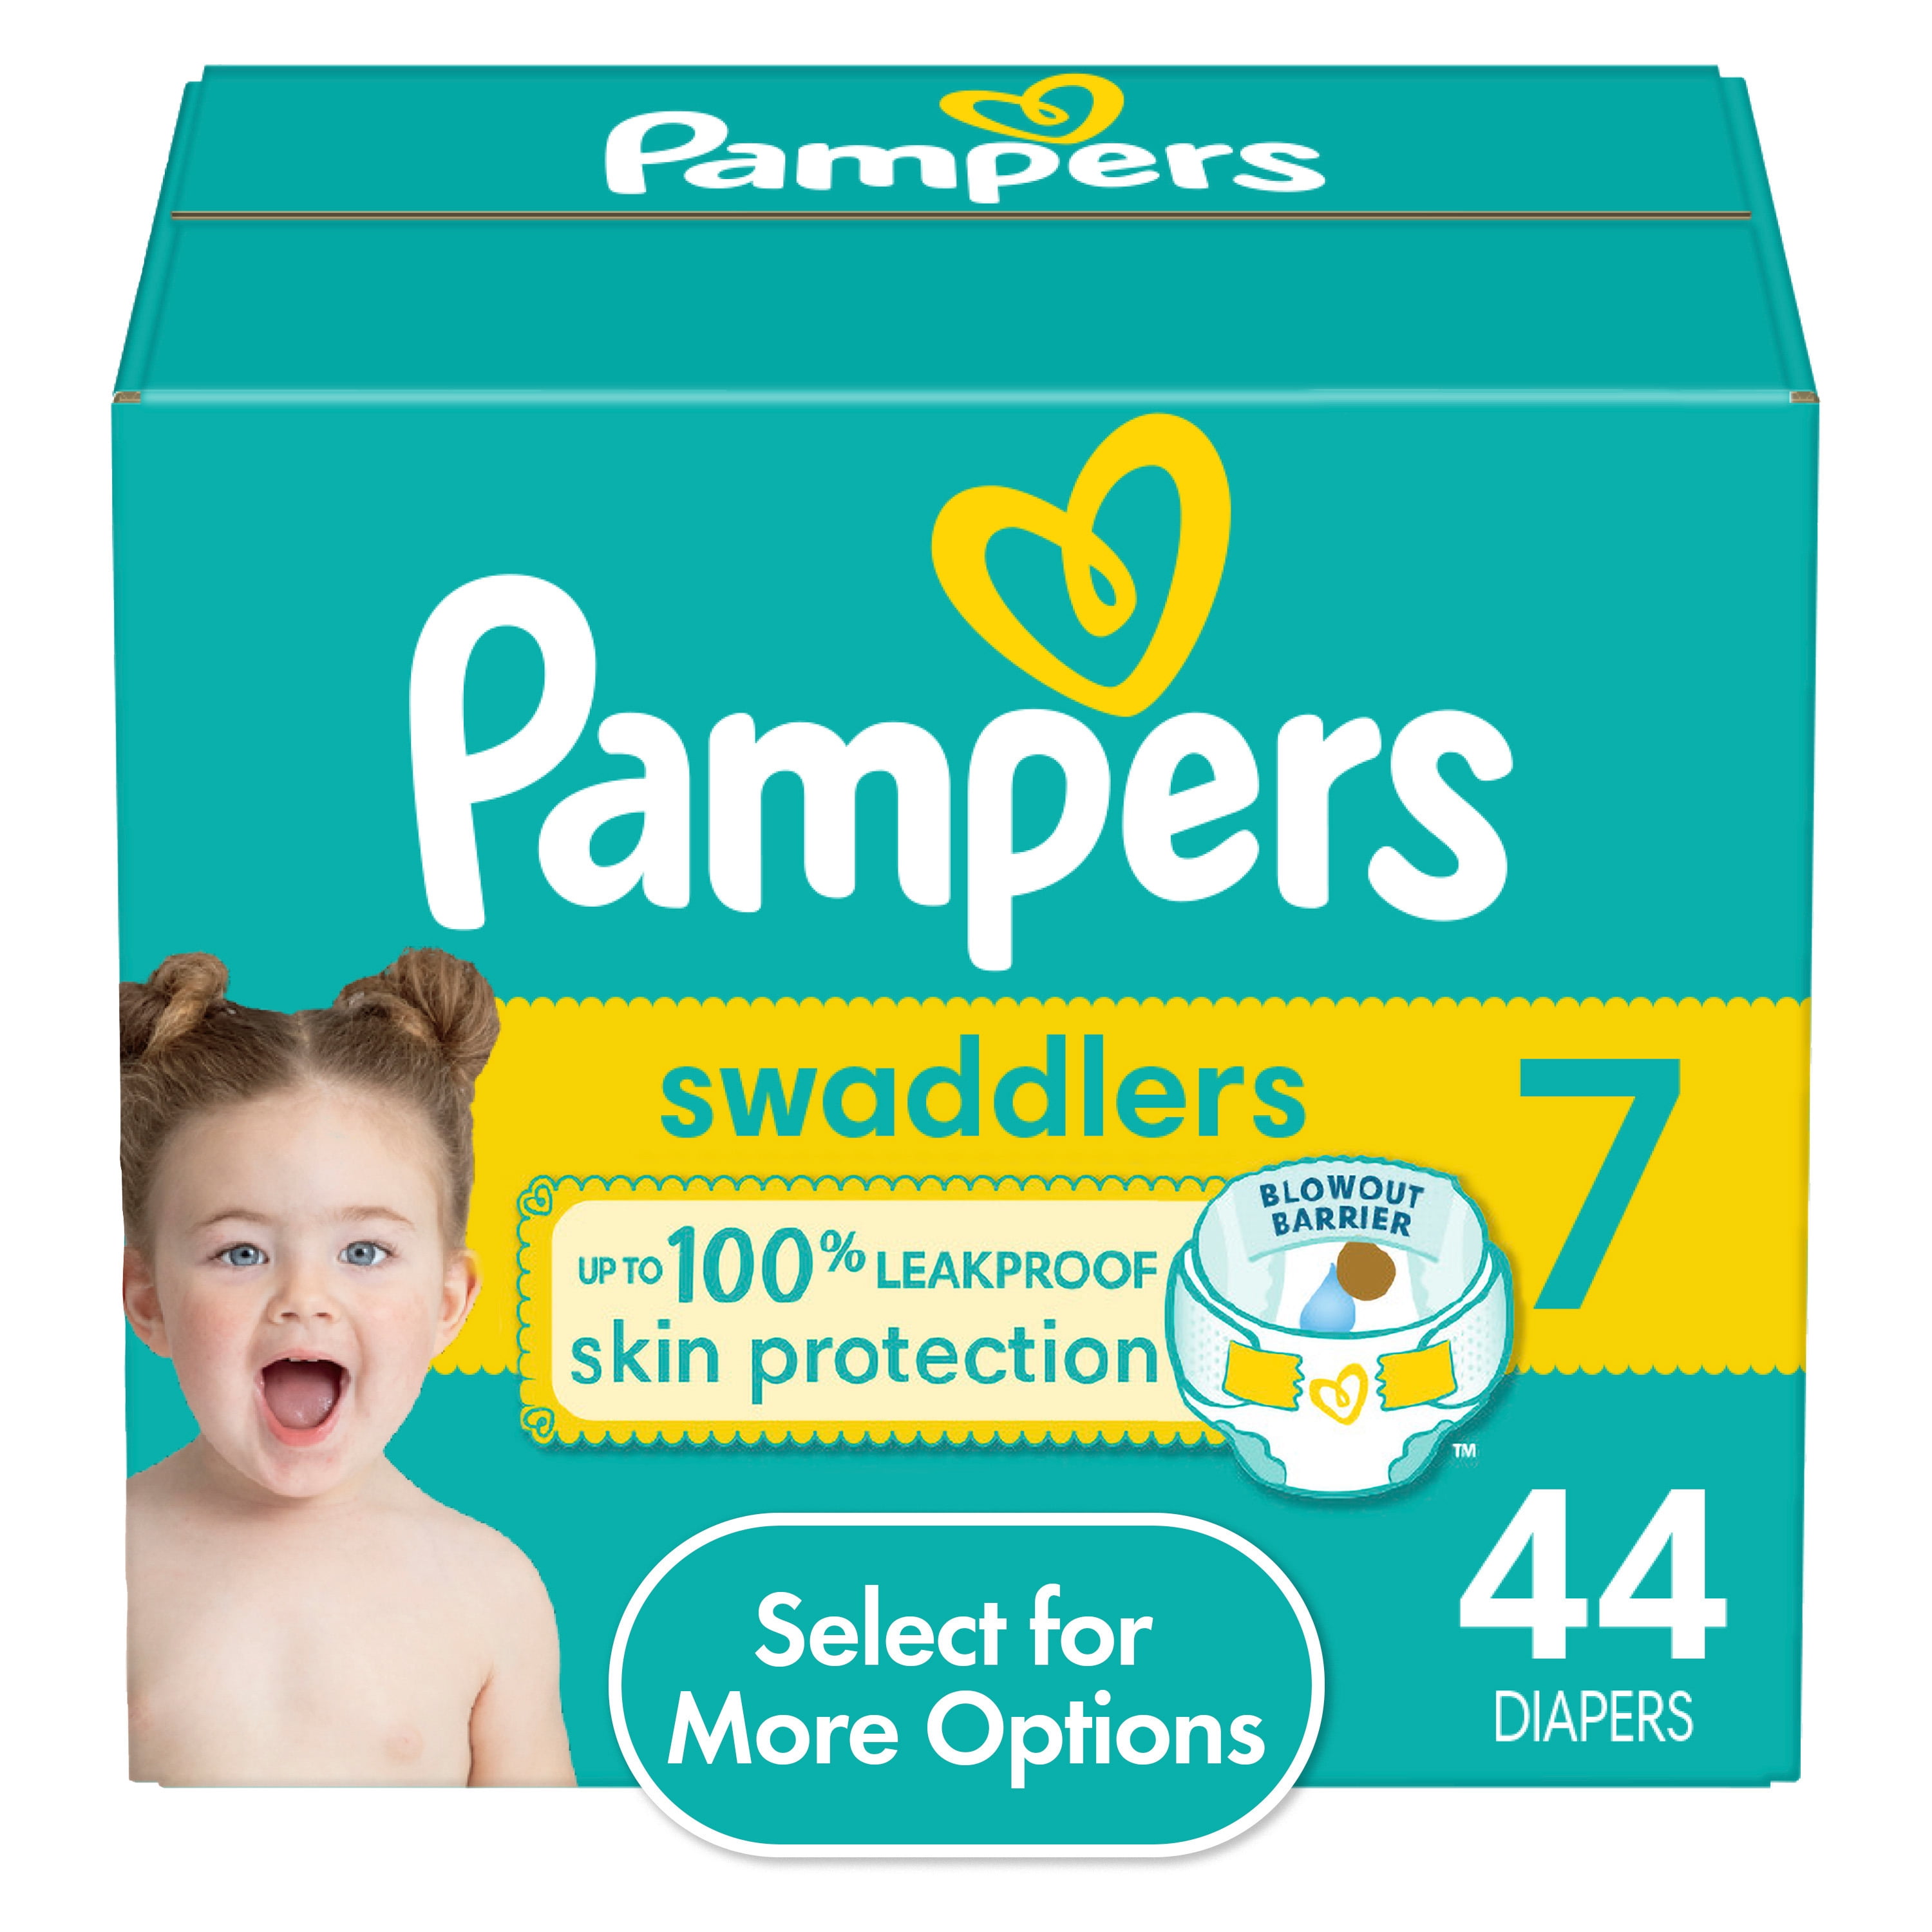 Pampers Swaddlers Diapers, Size 7, 44 Count (Select for More Options) 